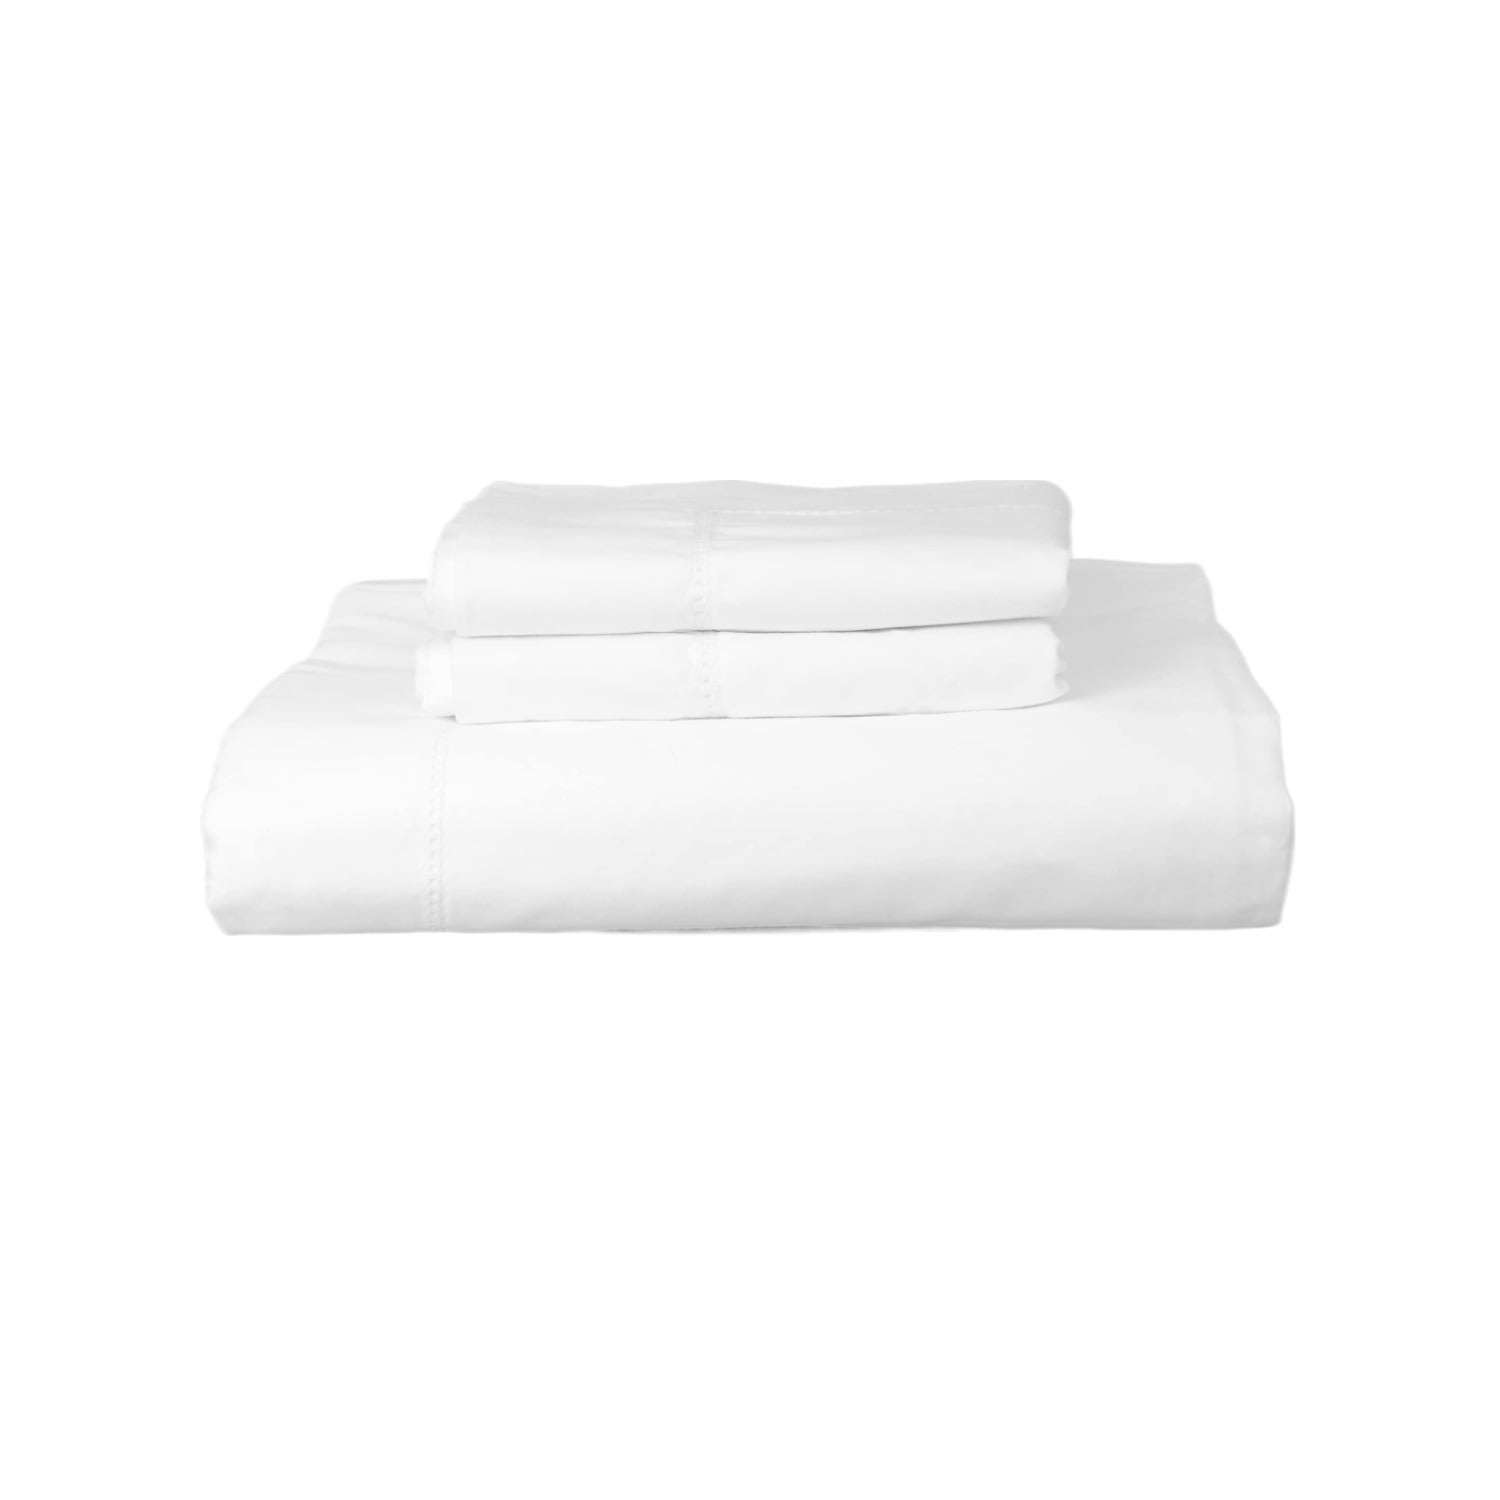 White Hemstitch 200 Thread Count Bed Linen Set Super King & Superking Pillowcases Uk Super King Tielle Love Luxury by Tradelinens